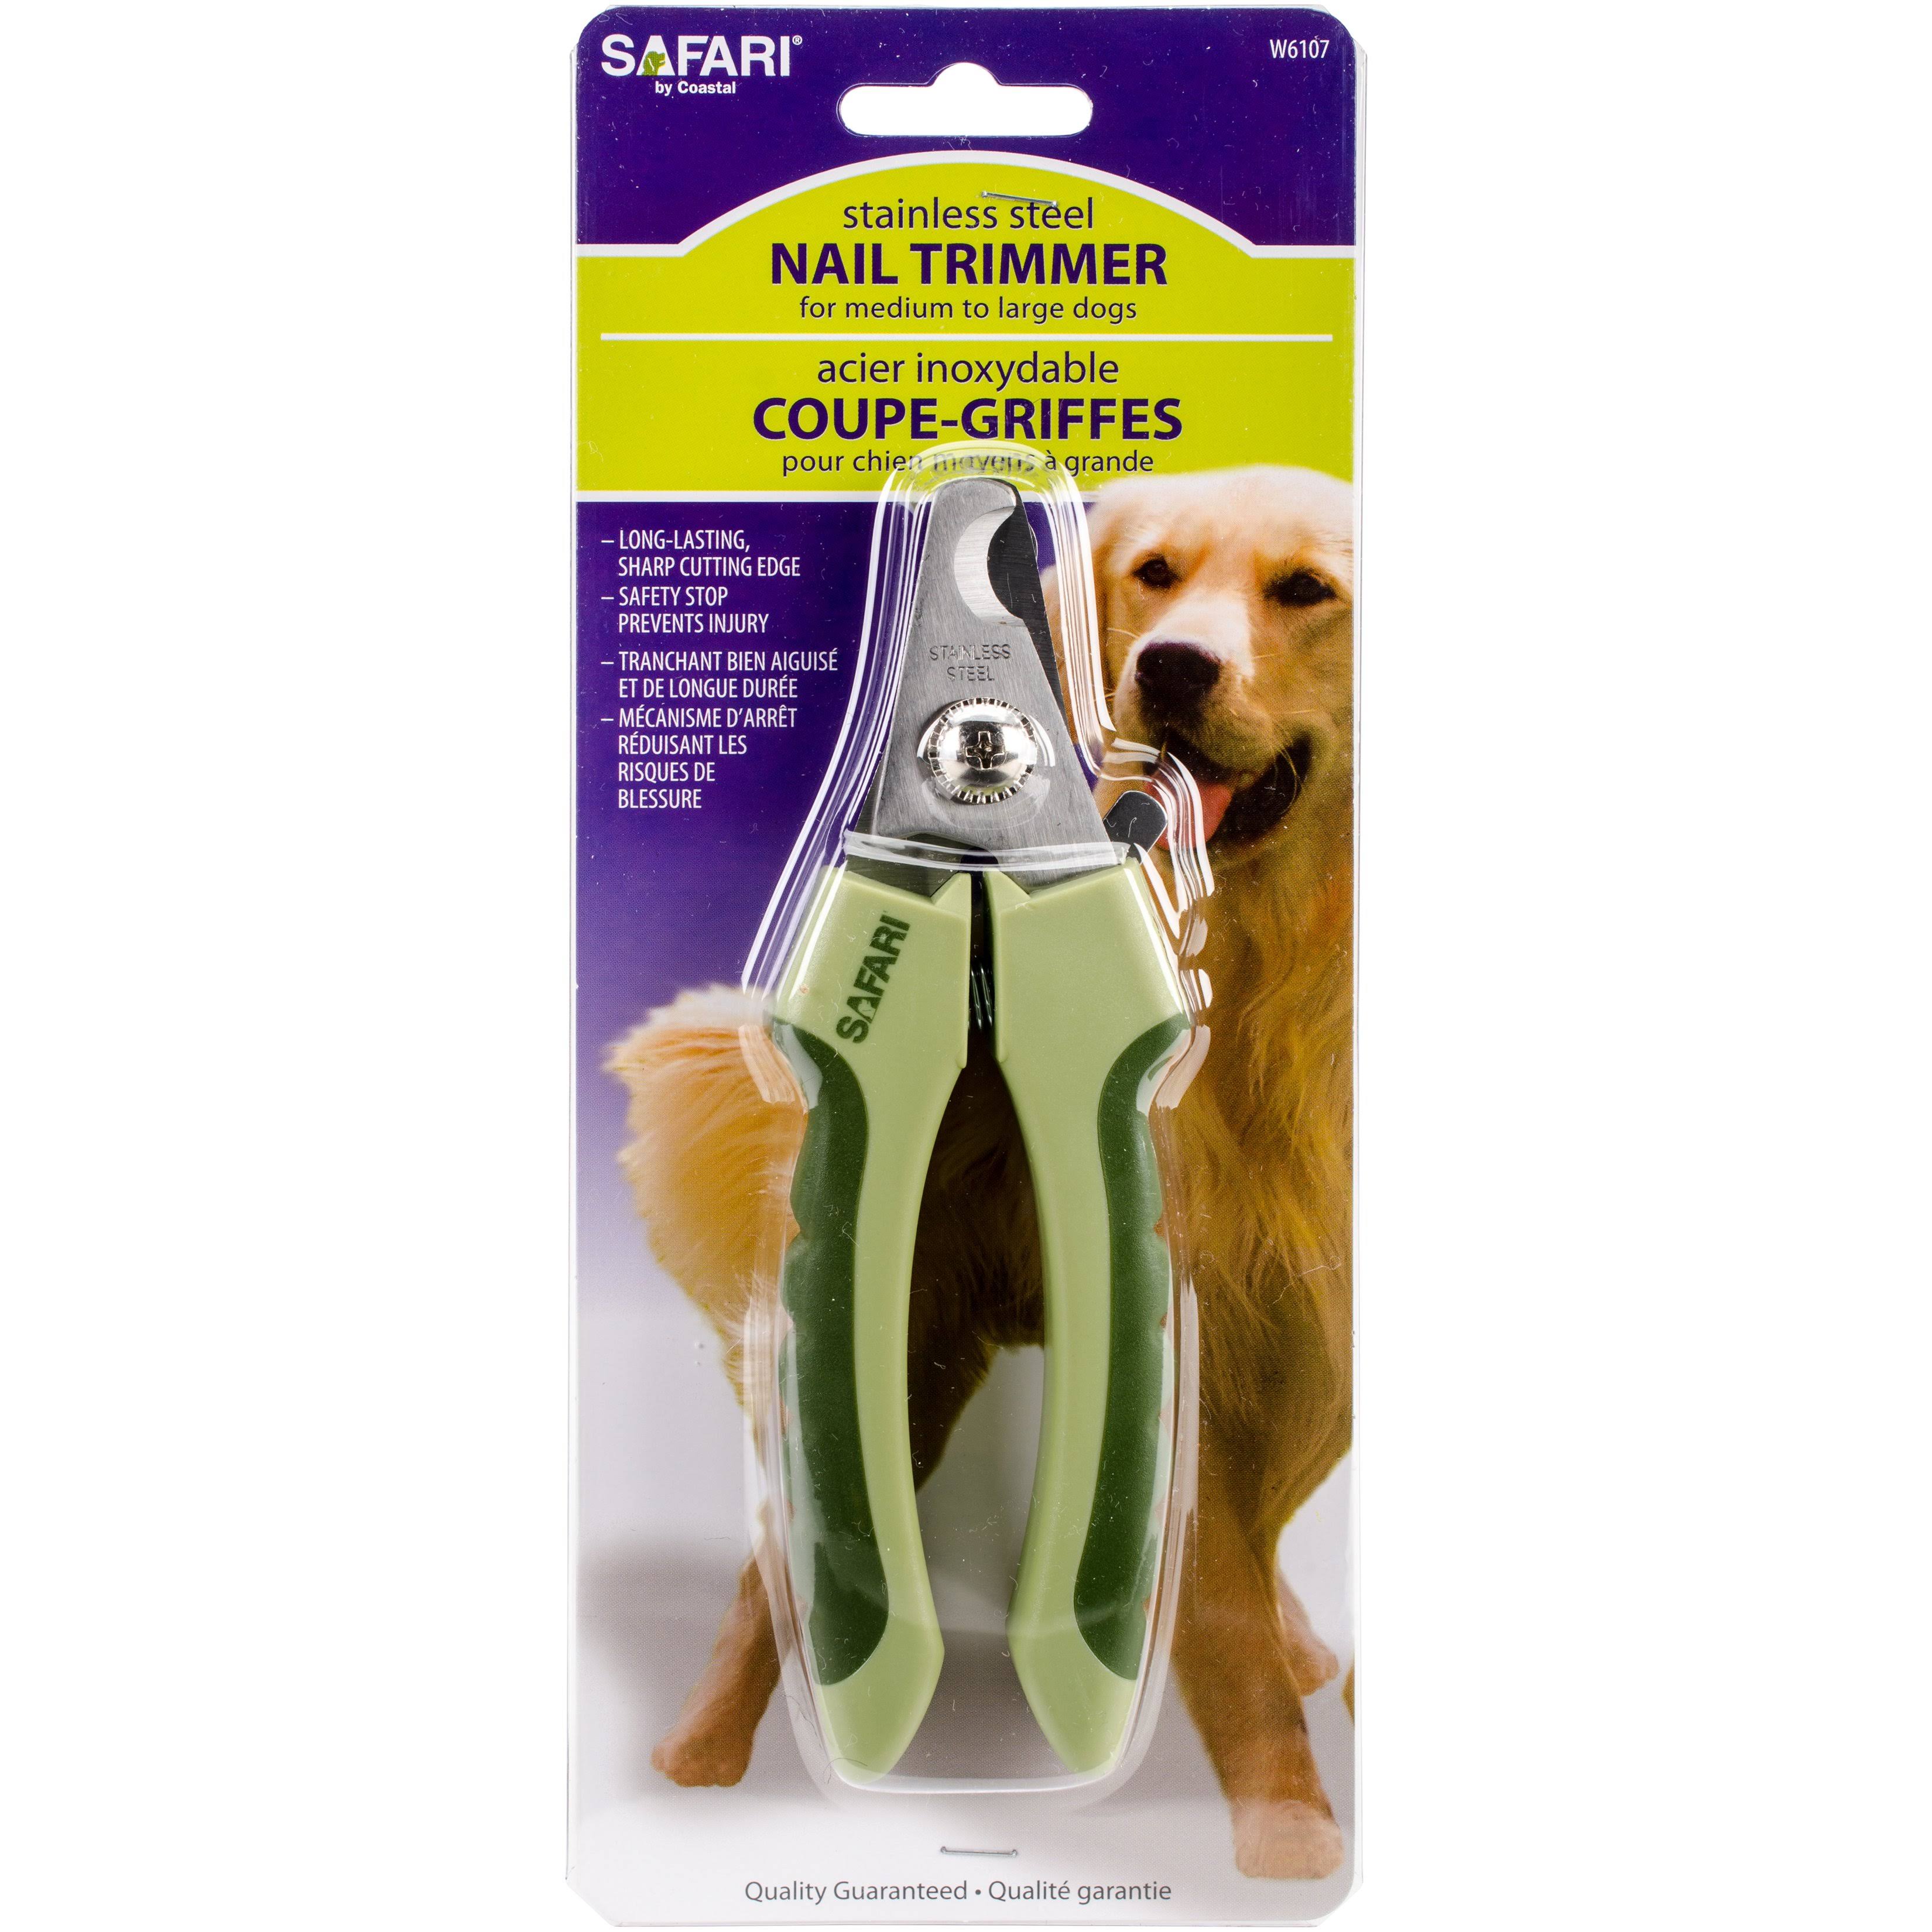 Safari Nail Trimmer for Medium to Large Dogs